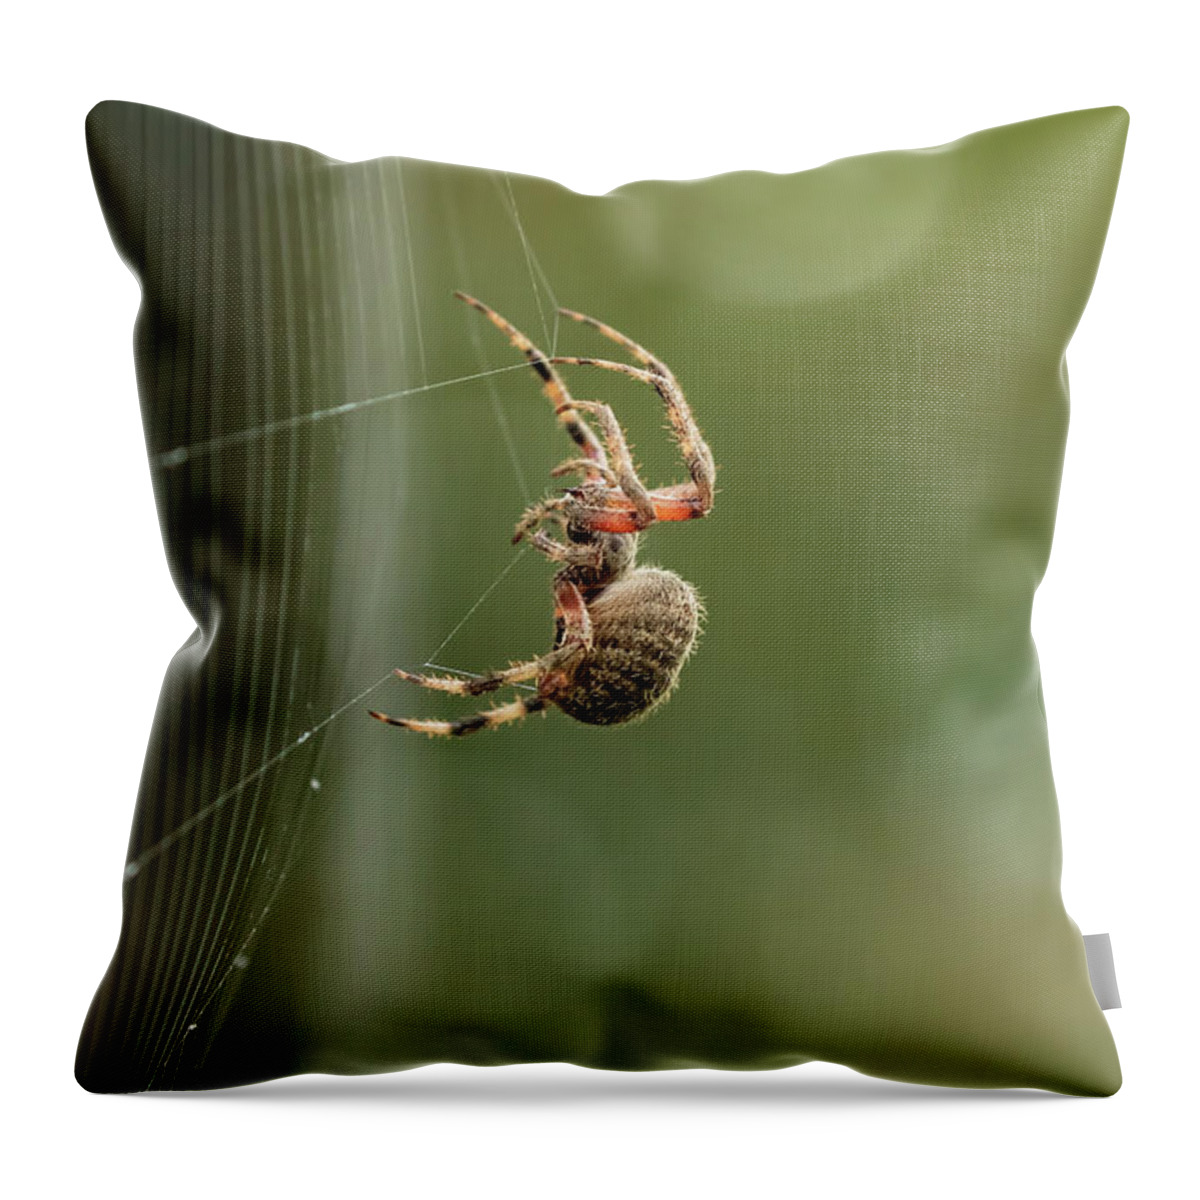 Spider Throw Pillow featuring the photograph Weave Your Web by Eilish Palmer